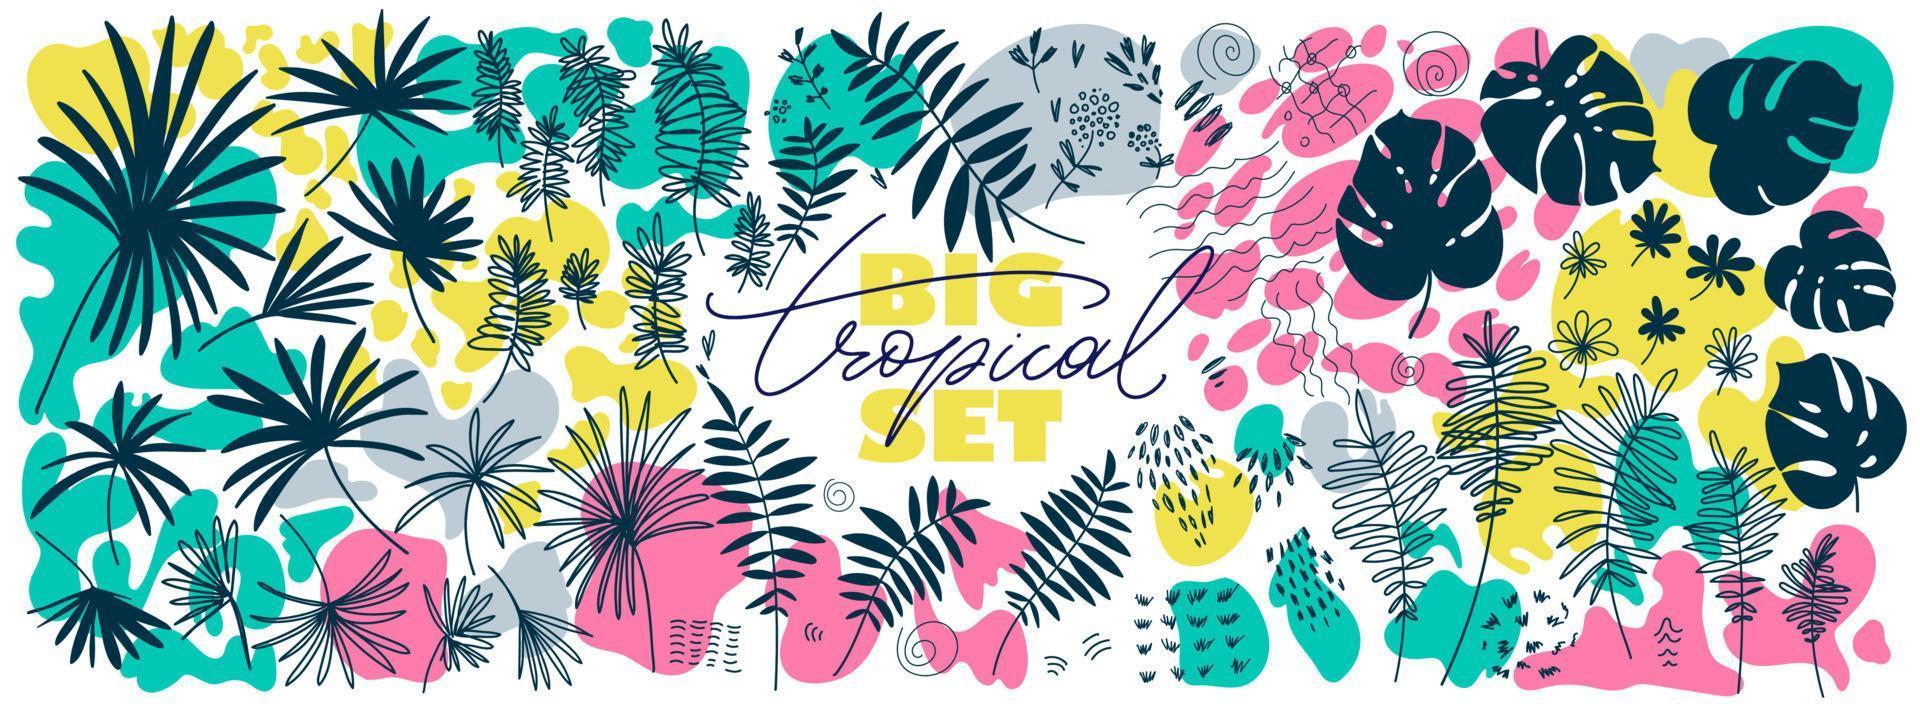 Tropical floral flat hand drawn elements. Set of modern organic shapes, strokes and palm leaves bright color. vector